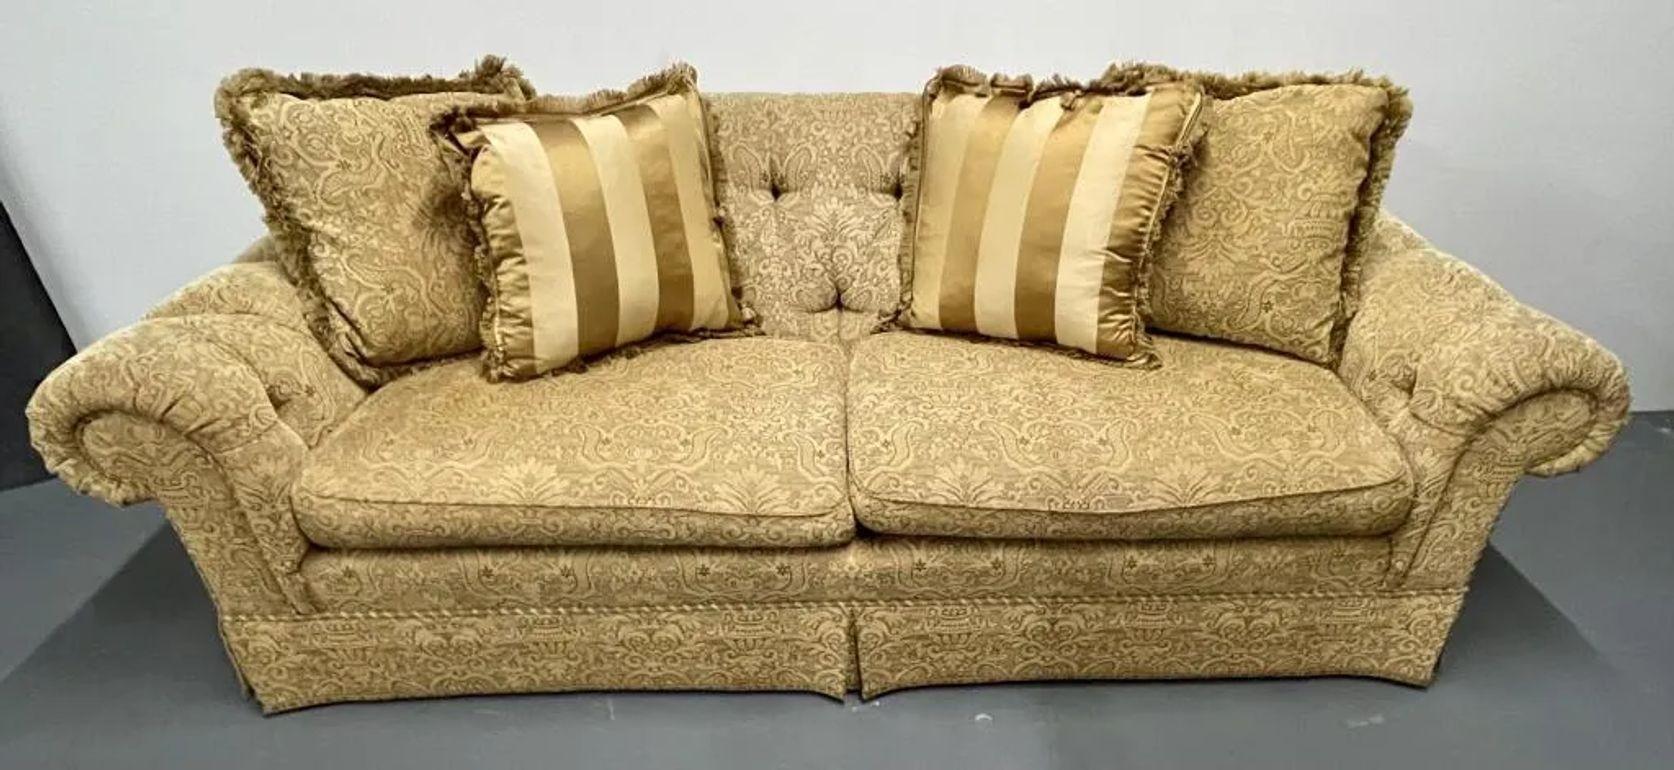 Large Traditional Custom Sofa, Beige Scalamandre Upholstery, Rolled Arms, 2000s

A large and comfortable TV sofa removed from a fine Long Island, NY estate, fitted with a later Scalamandre beige patterned upholstery. Featuring a tufted backrest and